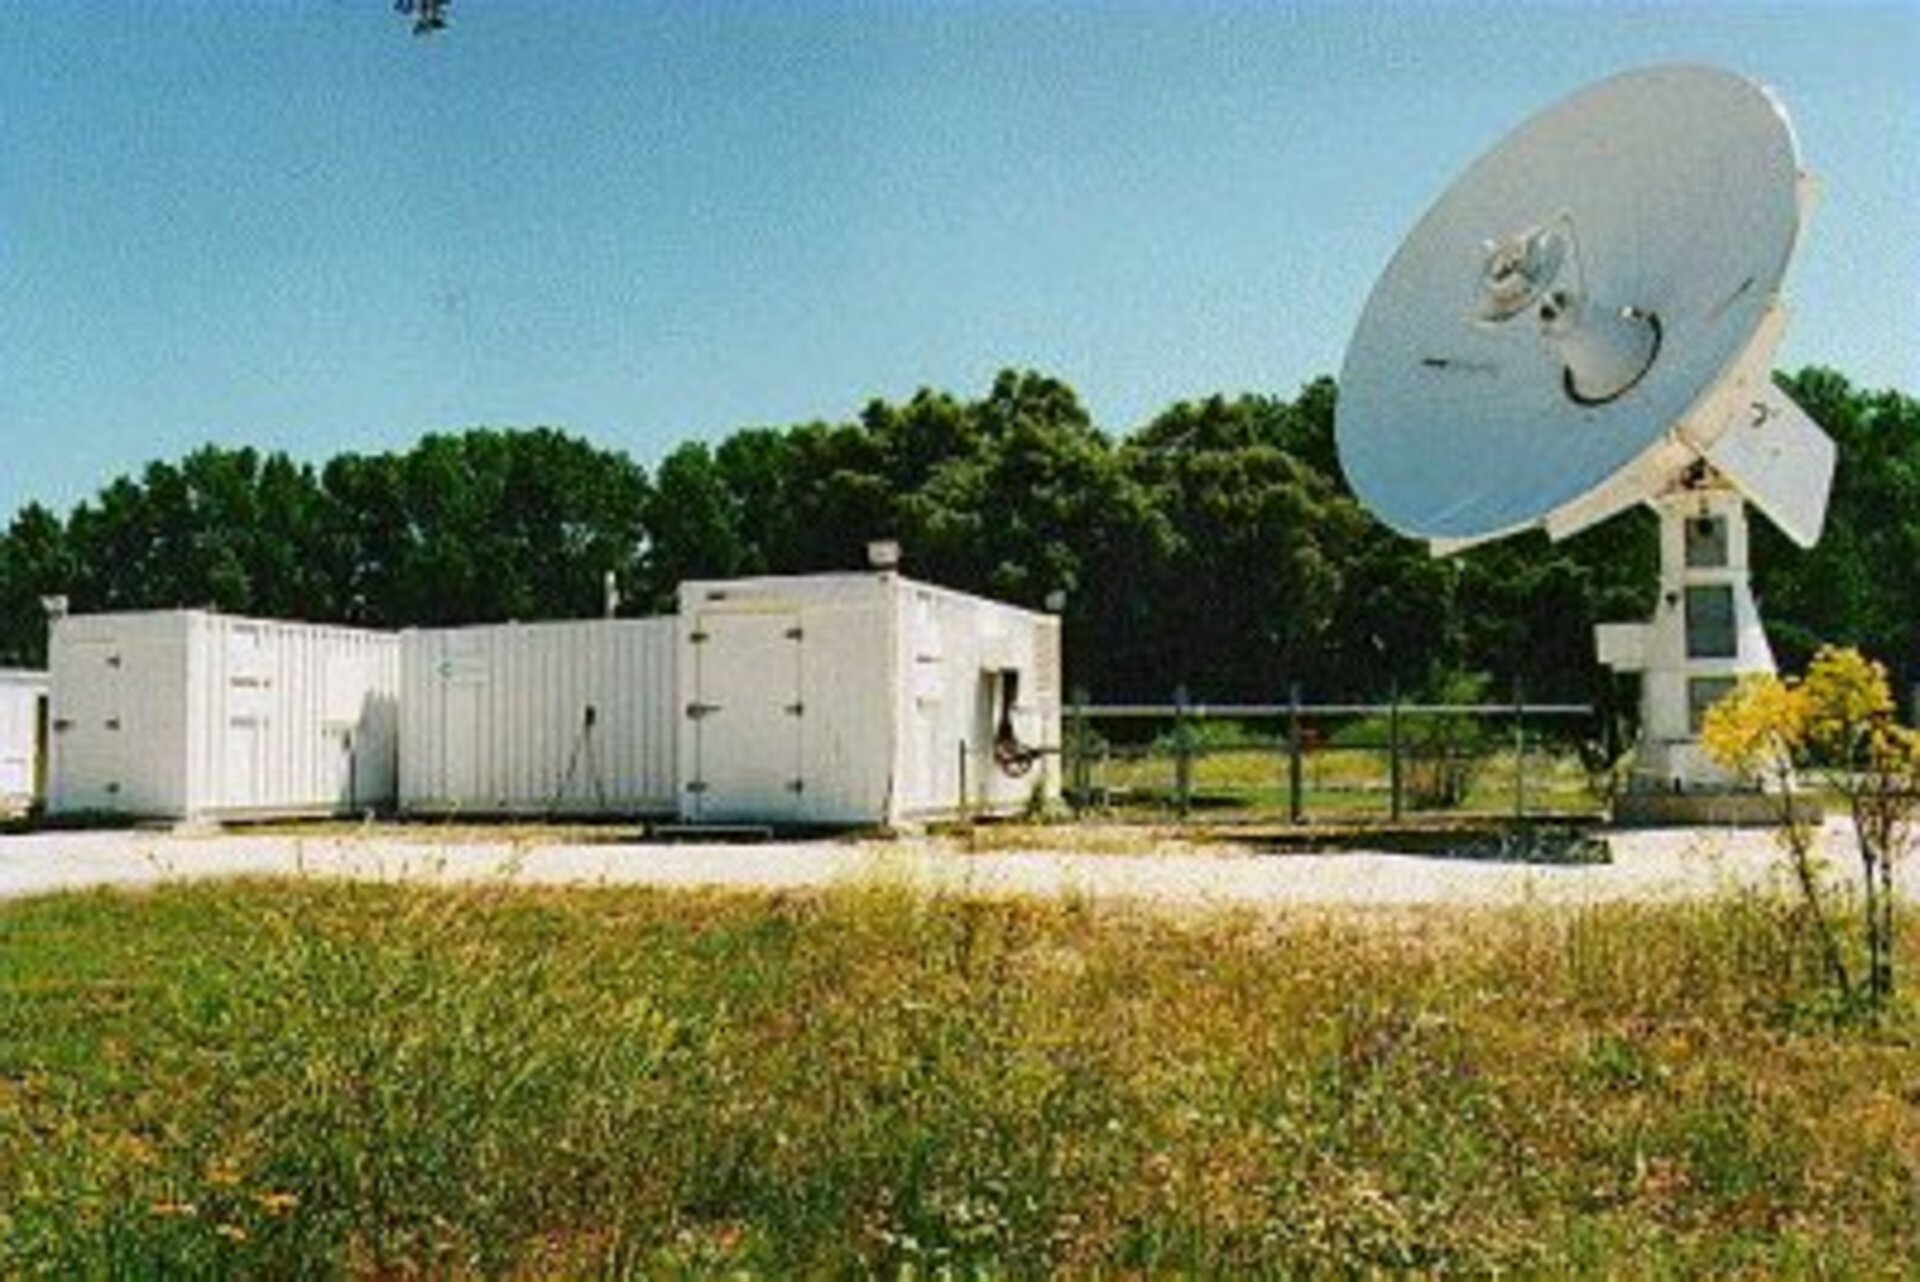 Transportable S-band ground station